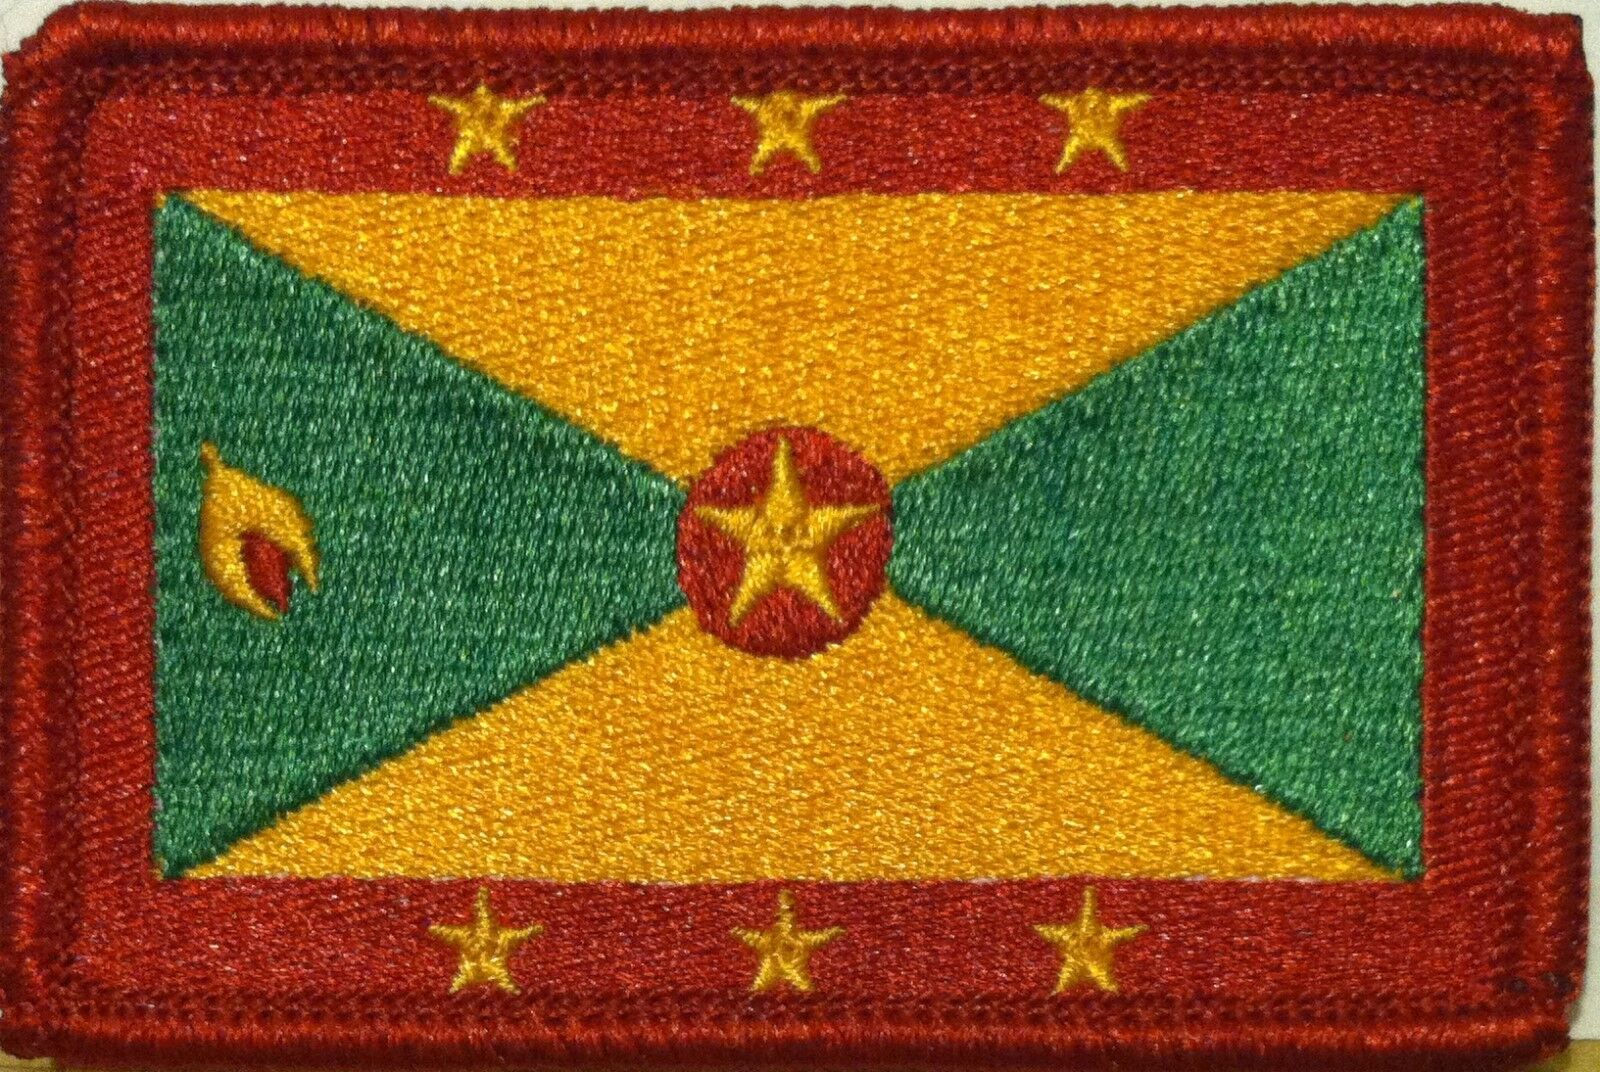 GRENADA Flag Tactical Patch W/ VELCRO® Brand Fastener Red Border #01